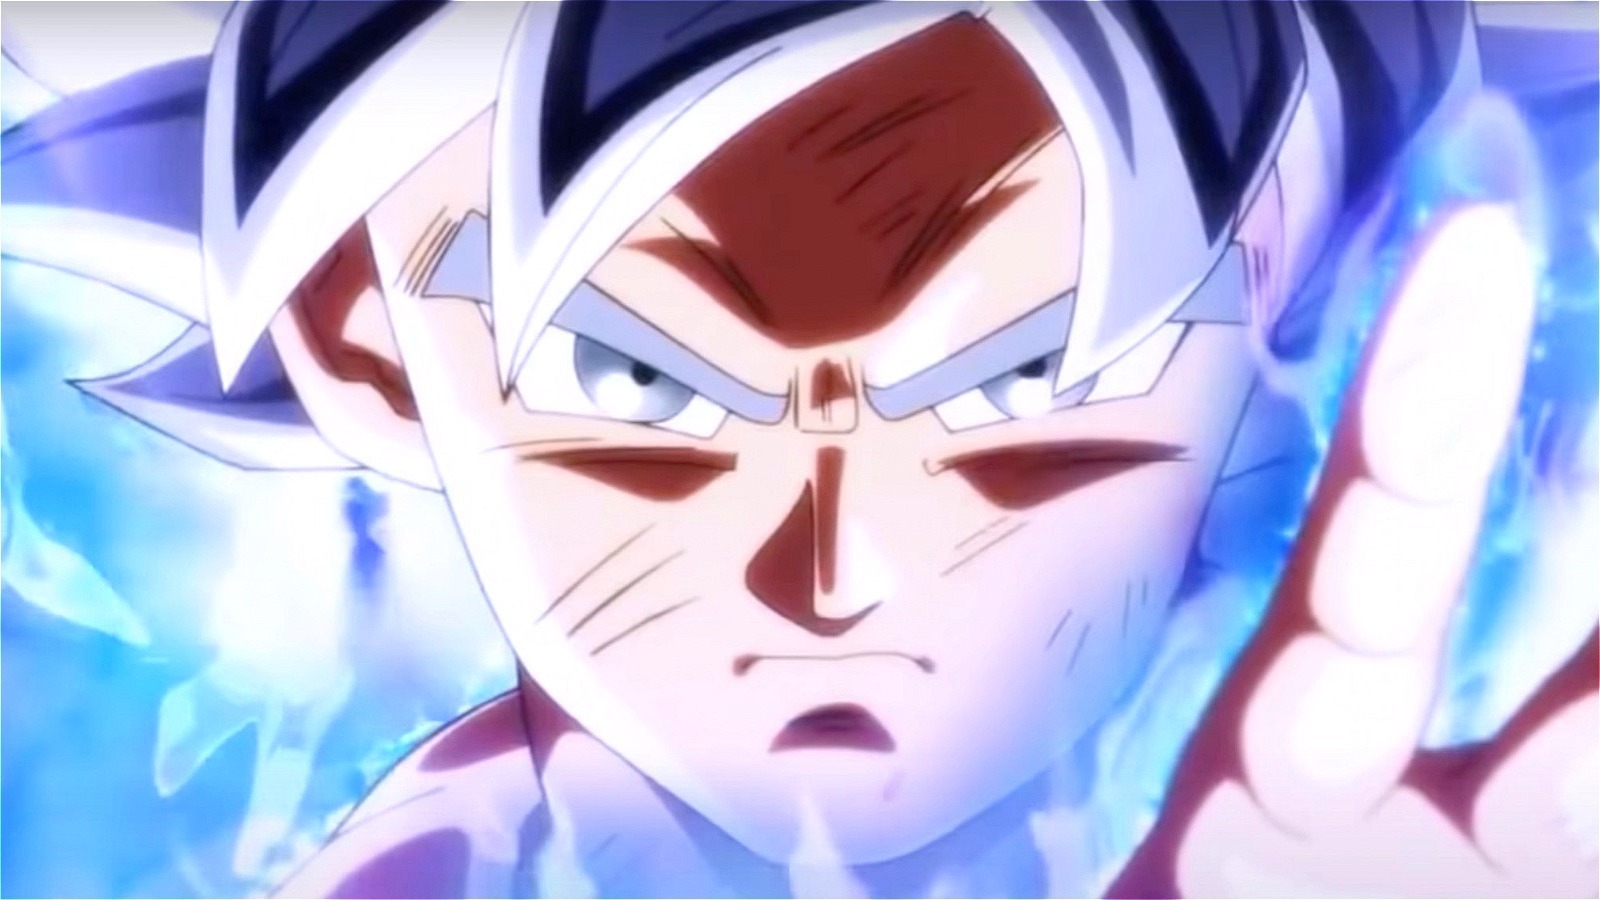 Everything You Need to Know About 'Dragon Ball Super